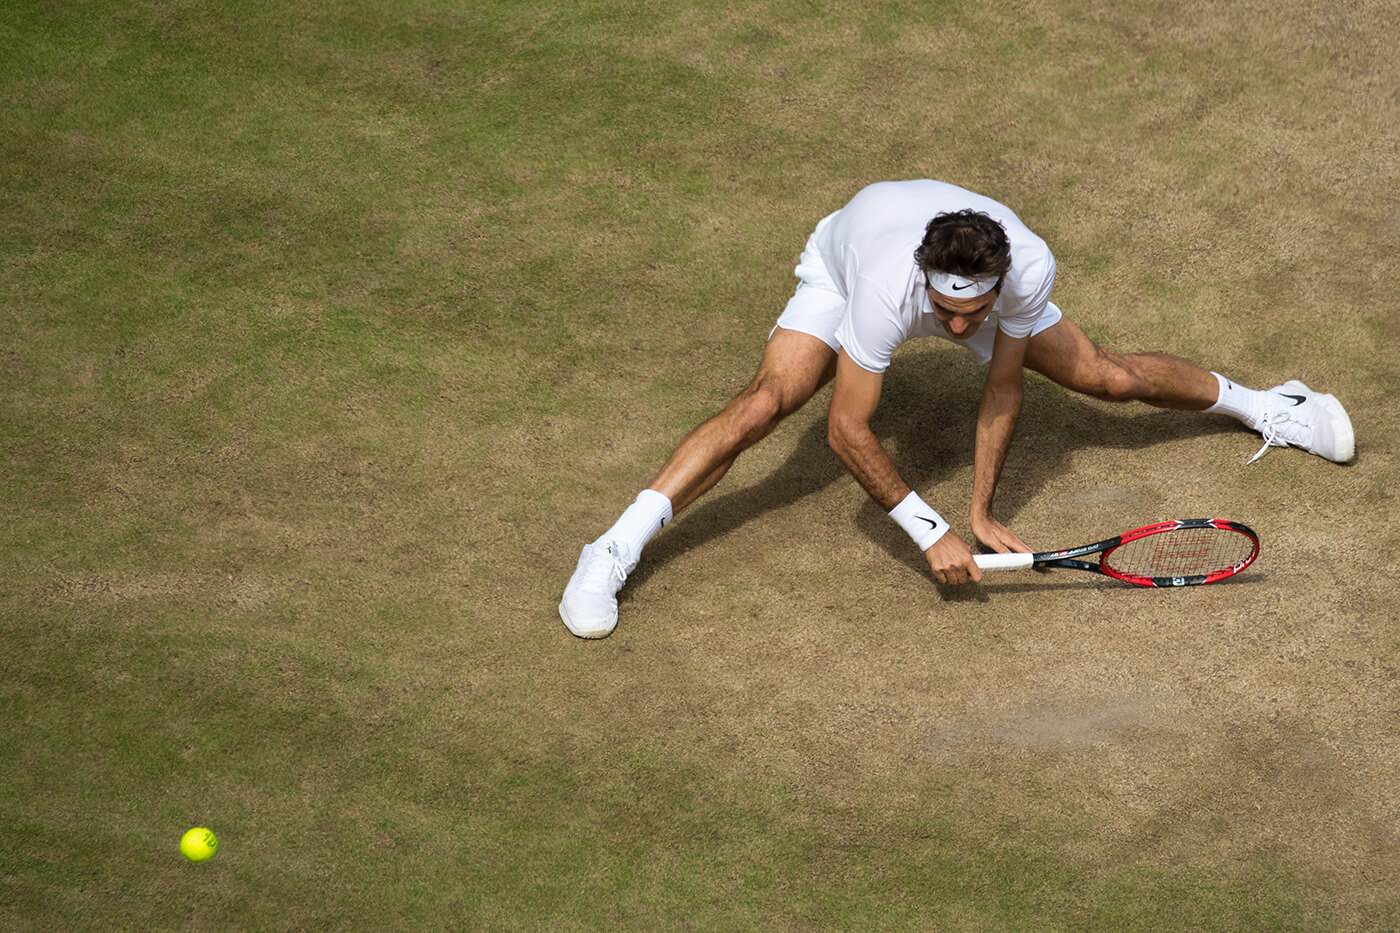 Roger Federer (SUI) playing against Marin Cilic (CRO) in their quarter final of the Gentlemen’s Singles on Centre Court. The Championships 2016 at The All England Lawn Tennis Club, Wimbledon. Day 9 Wednesday 06/07/2016. AELTC/Joe Toth